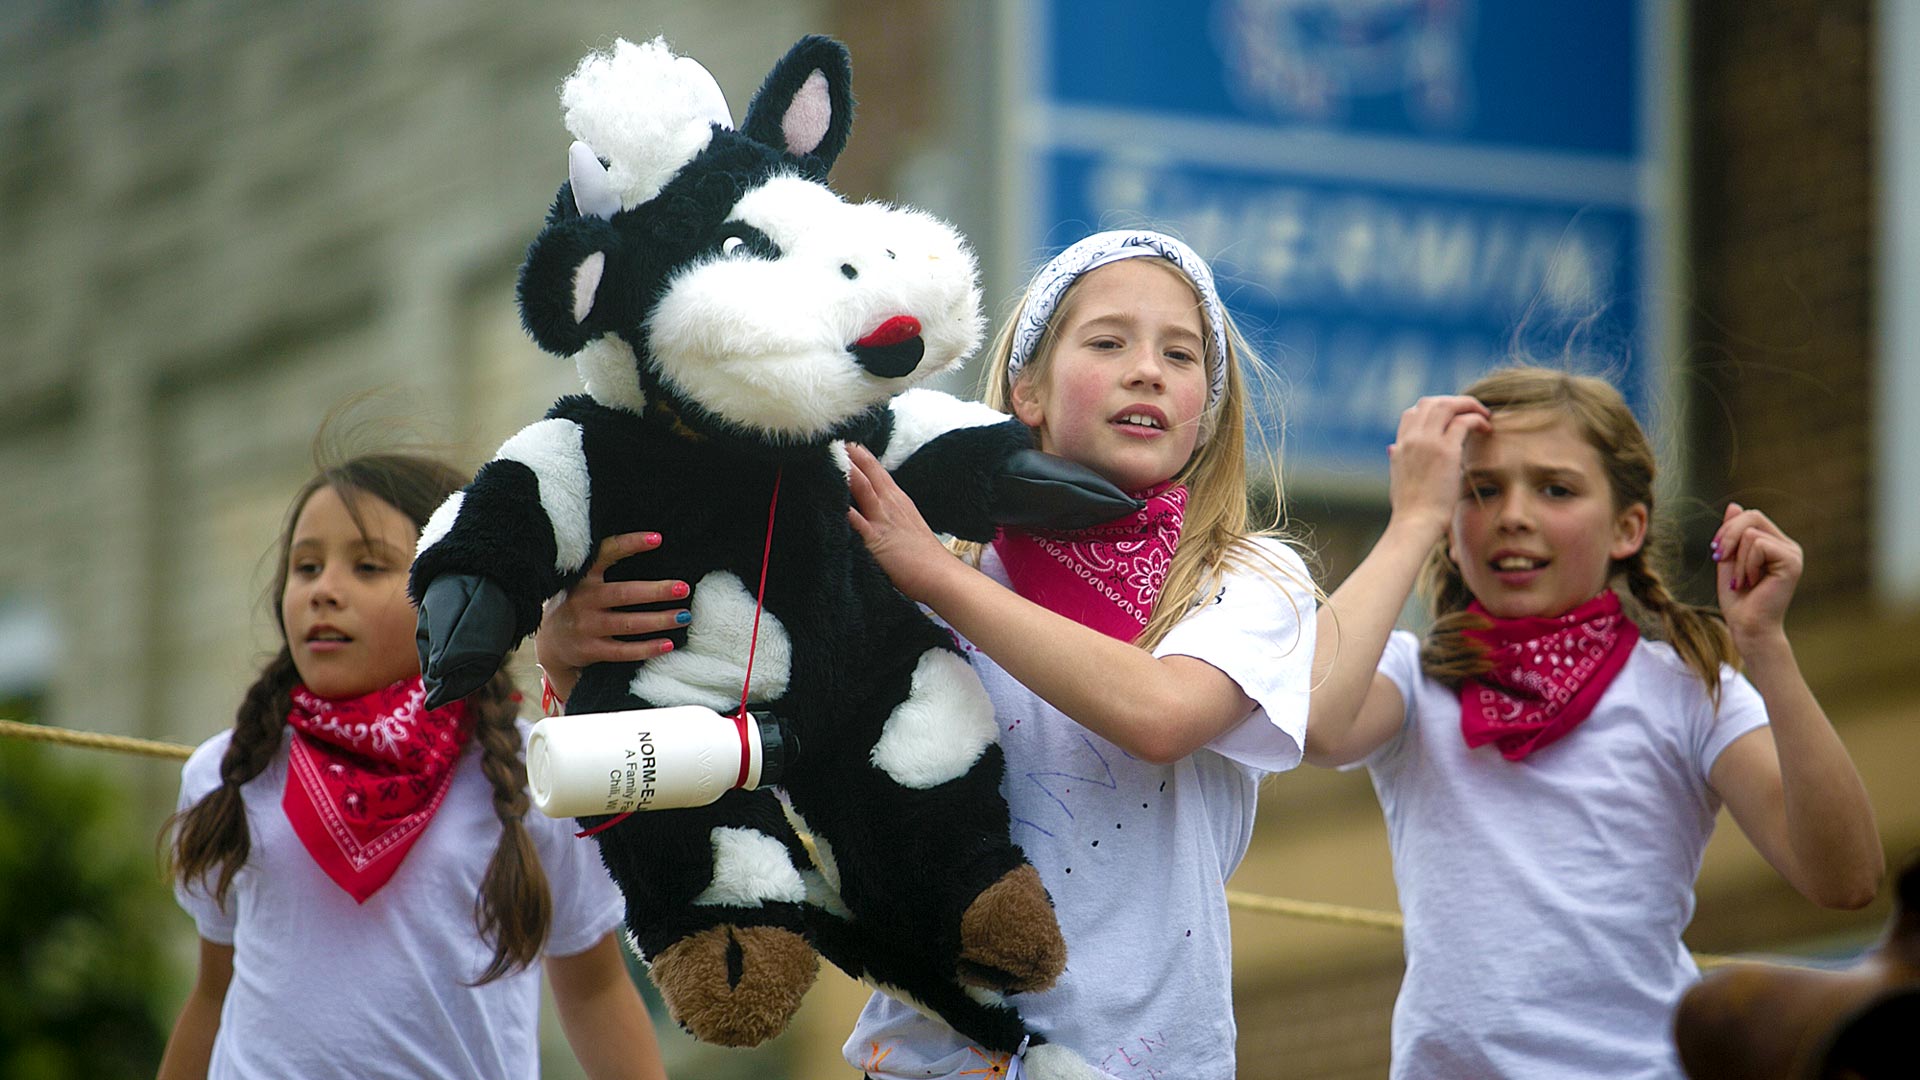 girls in parade holding stuffed cow at Dairyfest in Marshfield, WI